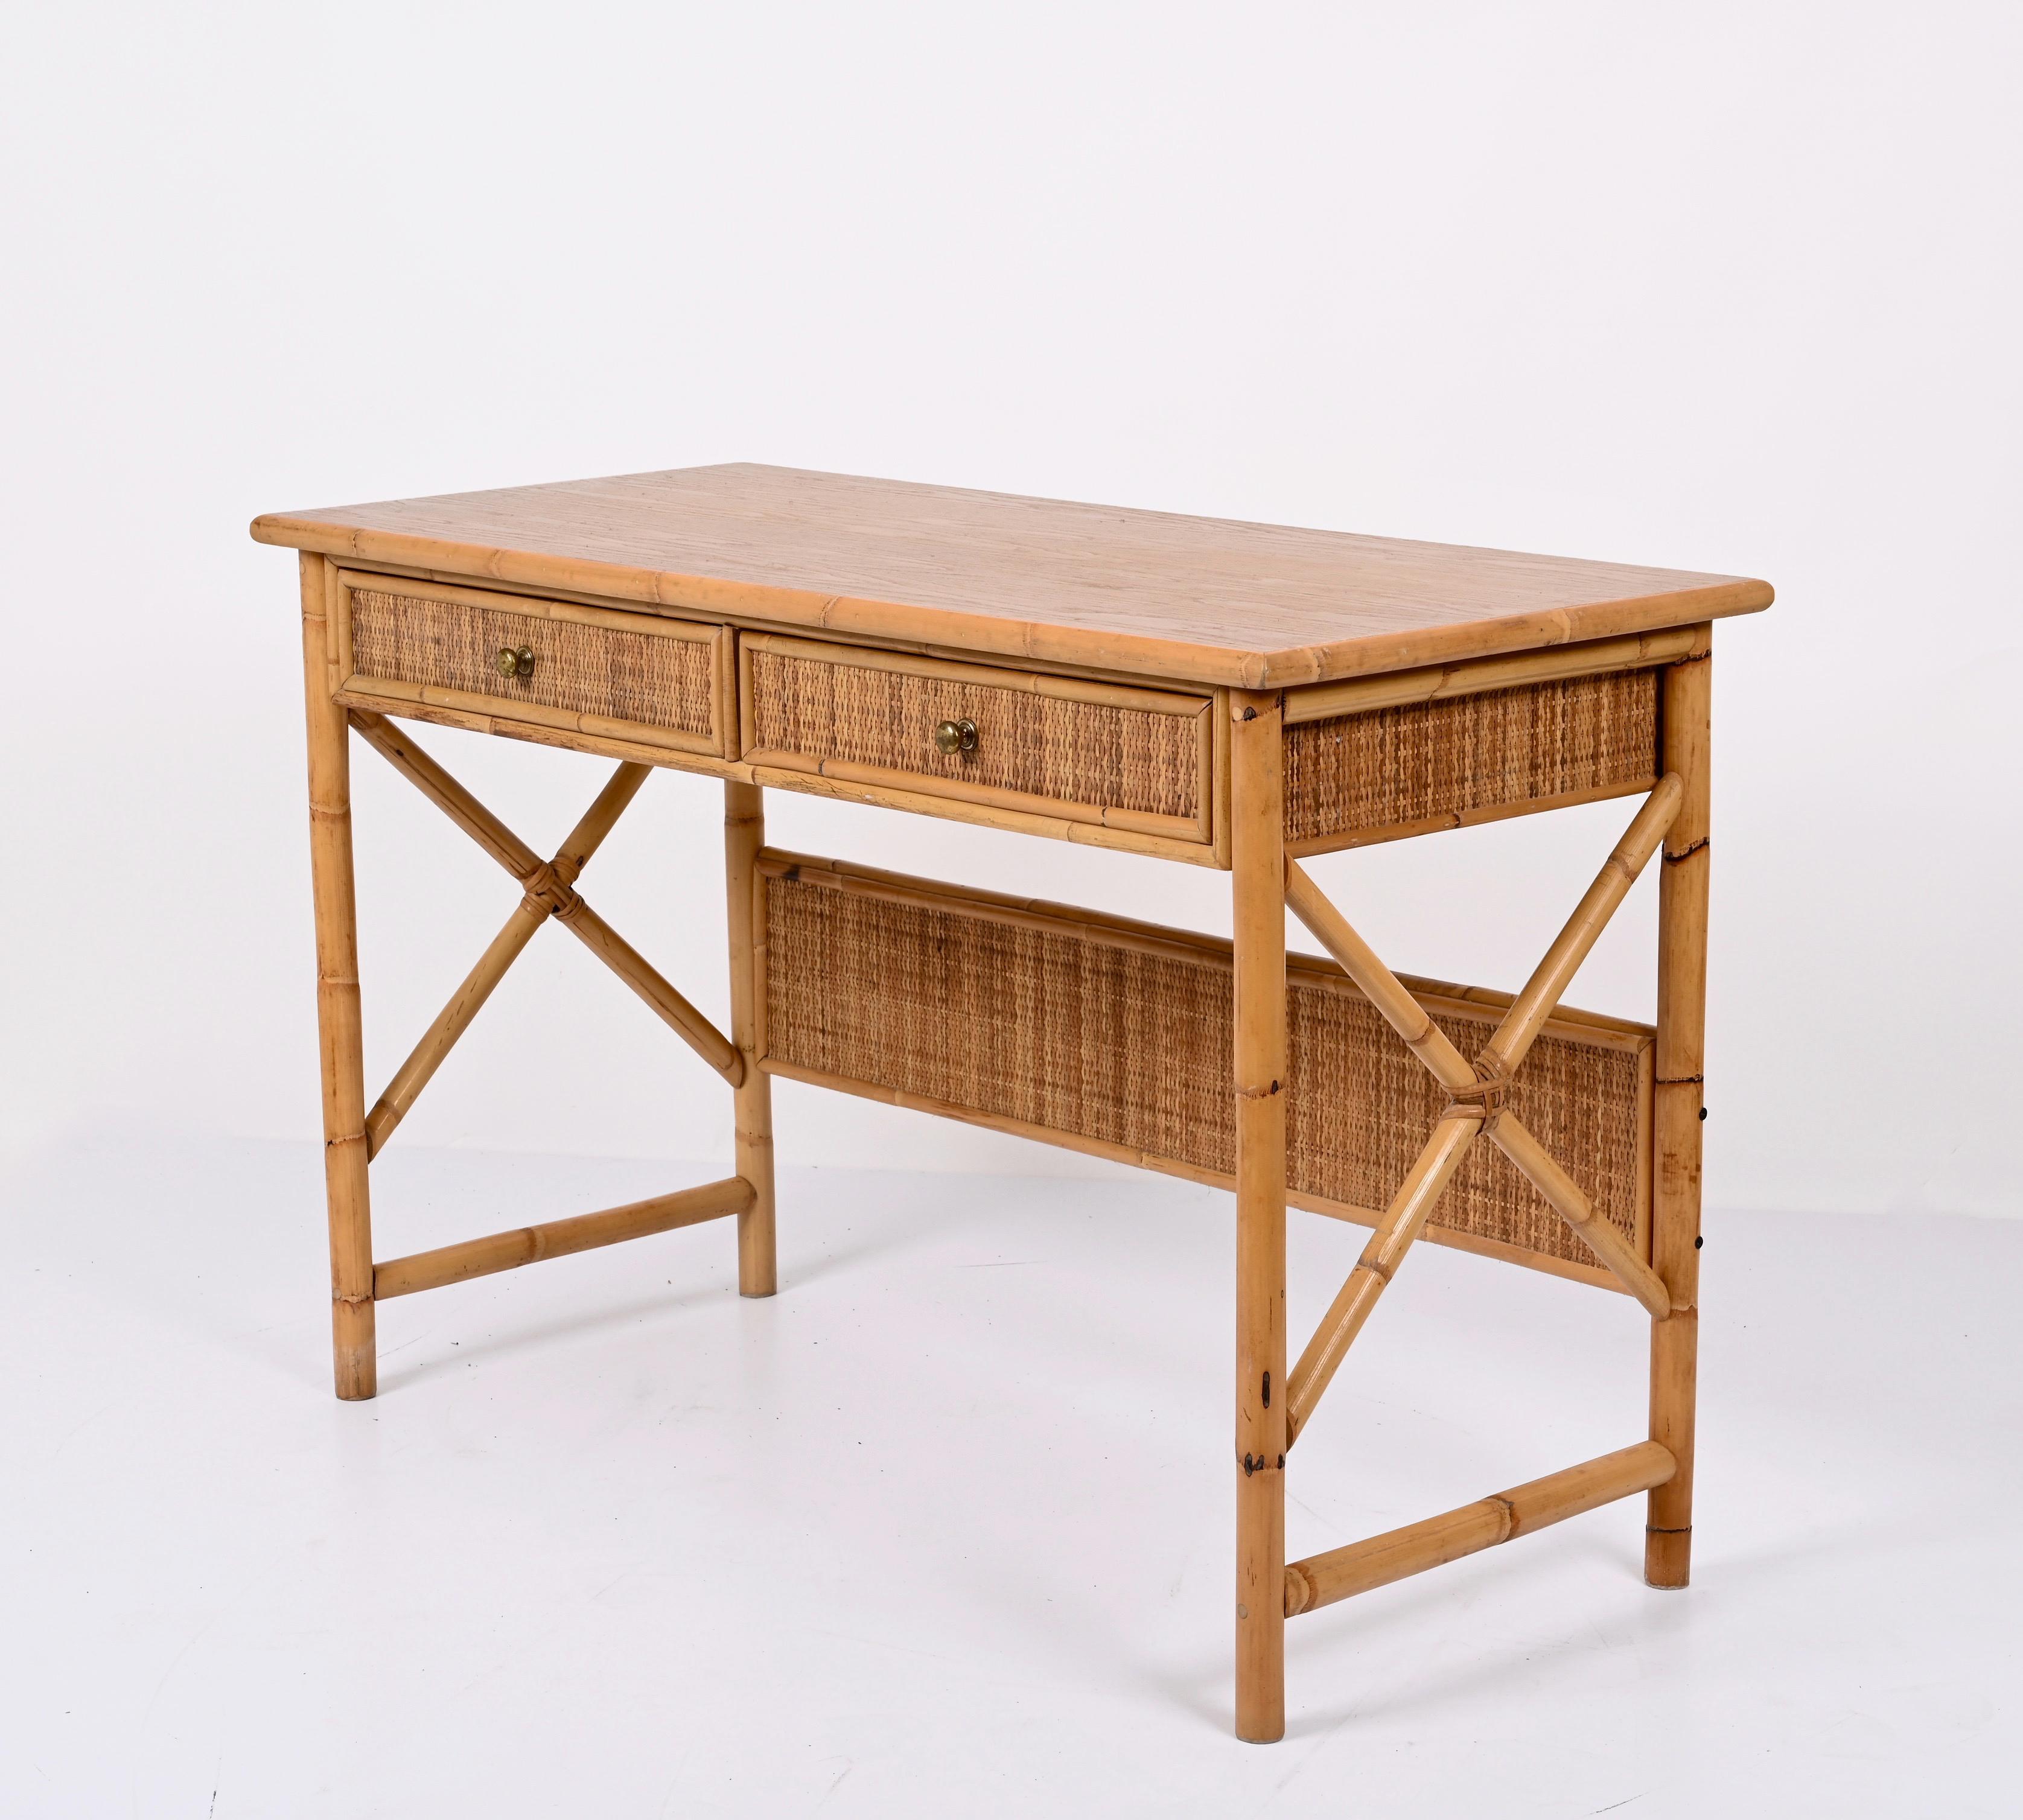 Amazing bamboo and wicker desk with mid century ash wood top with drawers. This wonderful piece was designed in Italy during the 1980s.

This desk is unique because of the materials, ash. bamboo and rattan are perfectly combined. The main